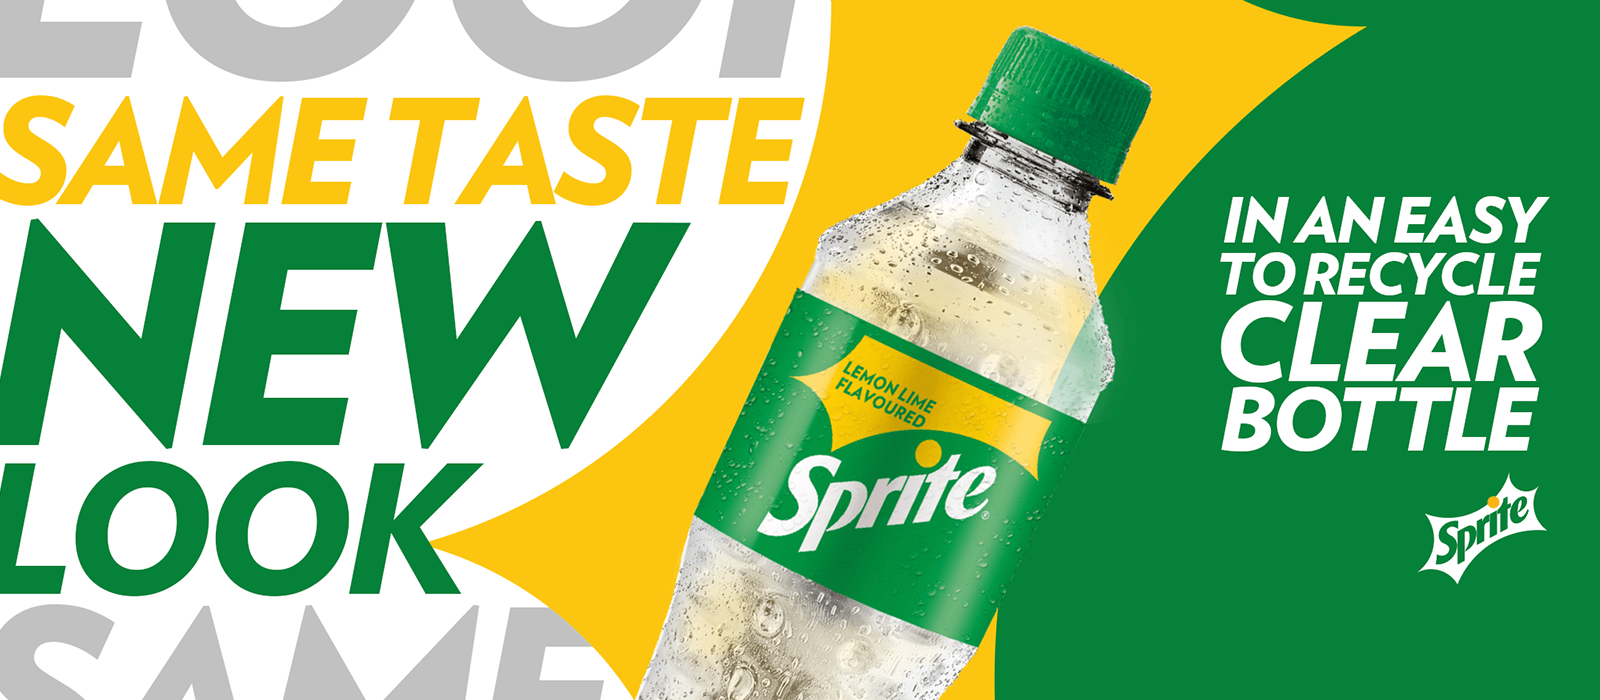 COCA-COLA UNVEILS NEW CLEAR LOOK FOR SPRITE TO ENHANCE PLASTIC COLLECTION AND RECYCLING